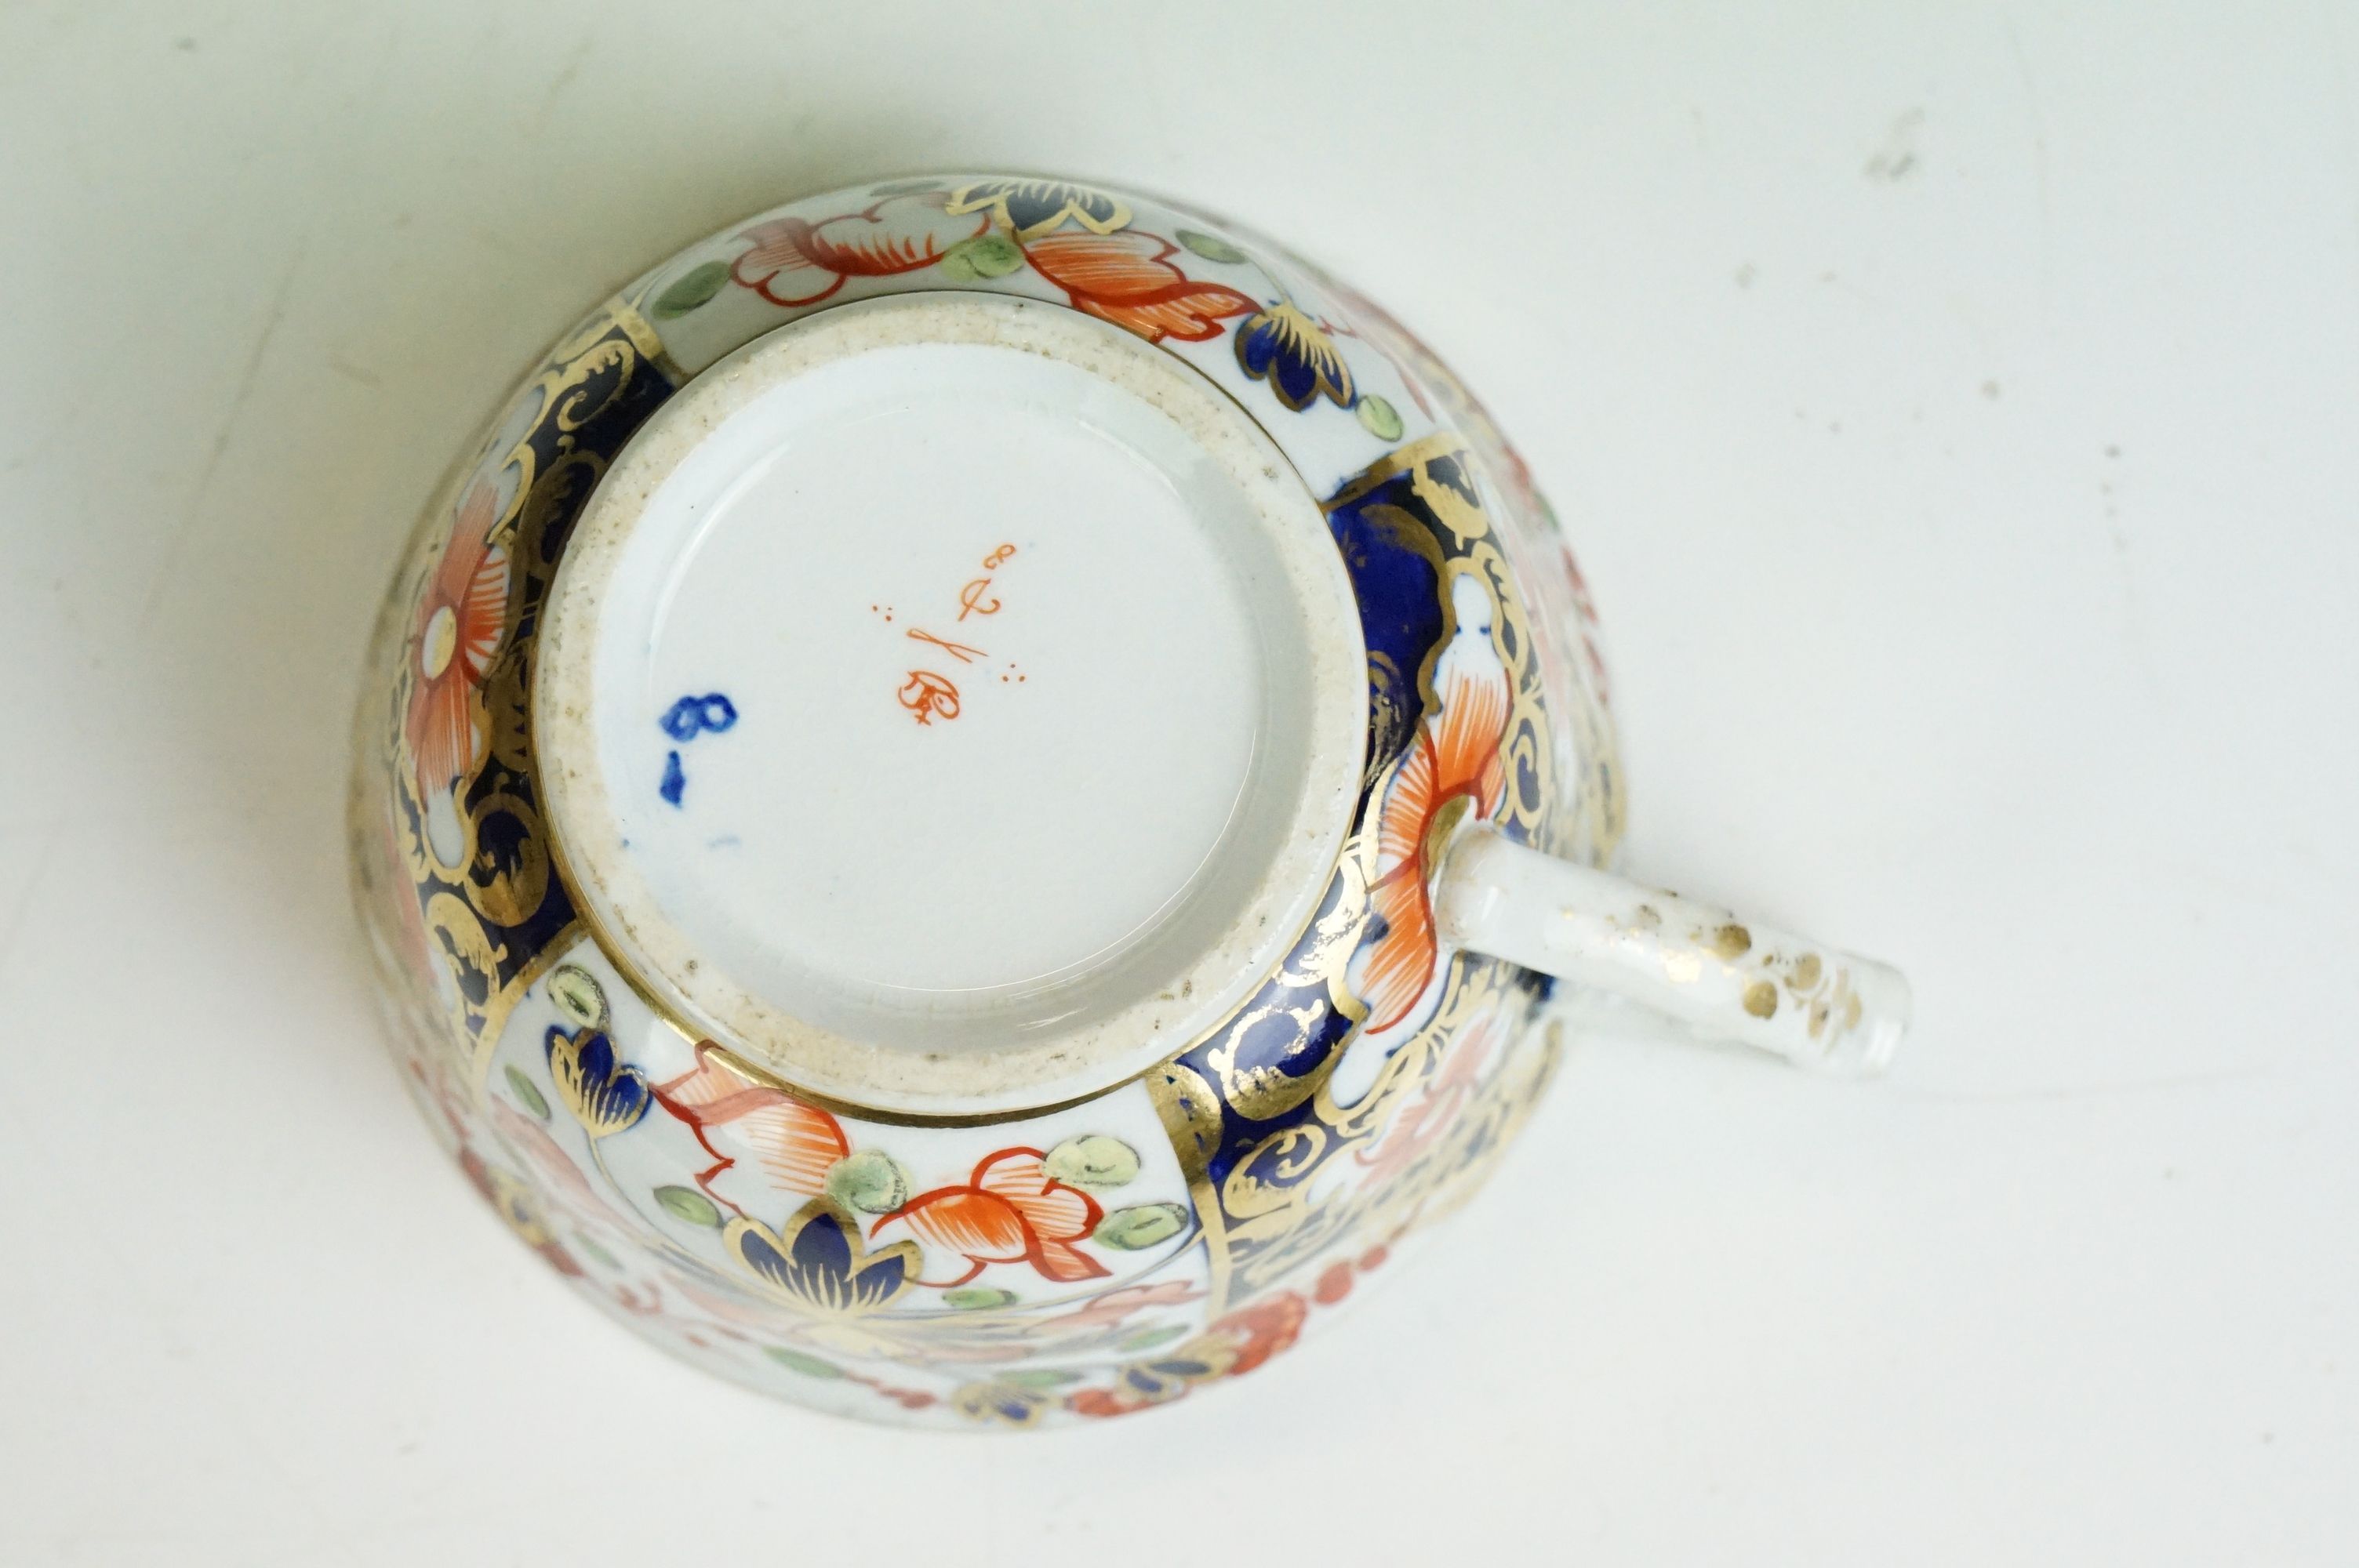 Early 19th century Crown Derby Imari pattern ceramics to include a small tureen & cover, teacups, - Image 24 of 24